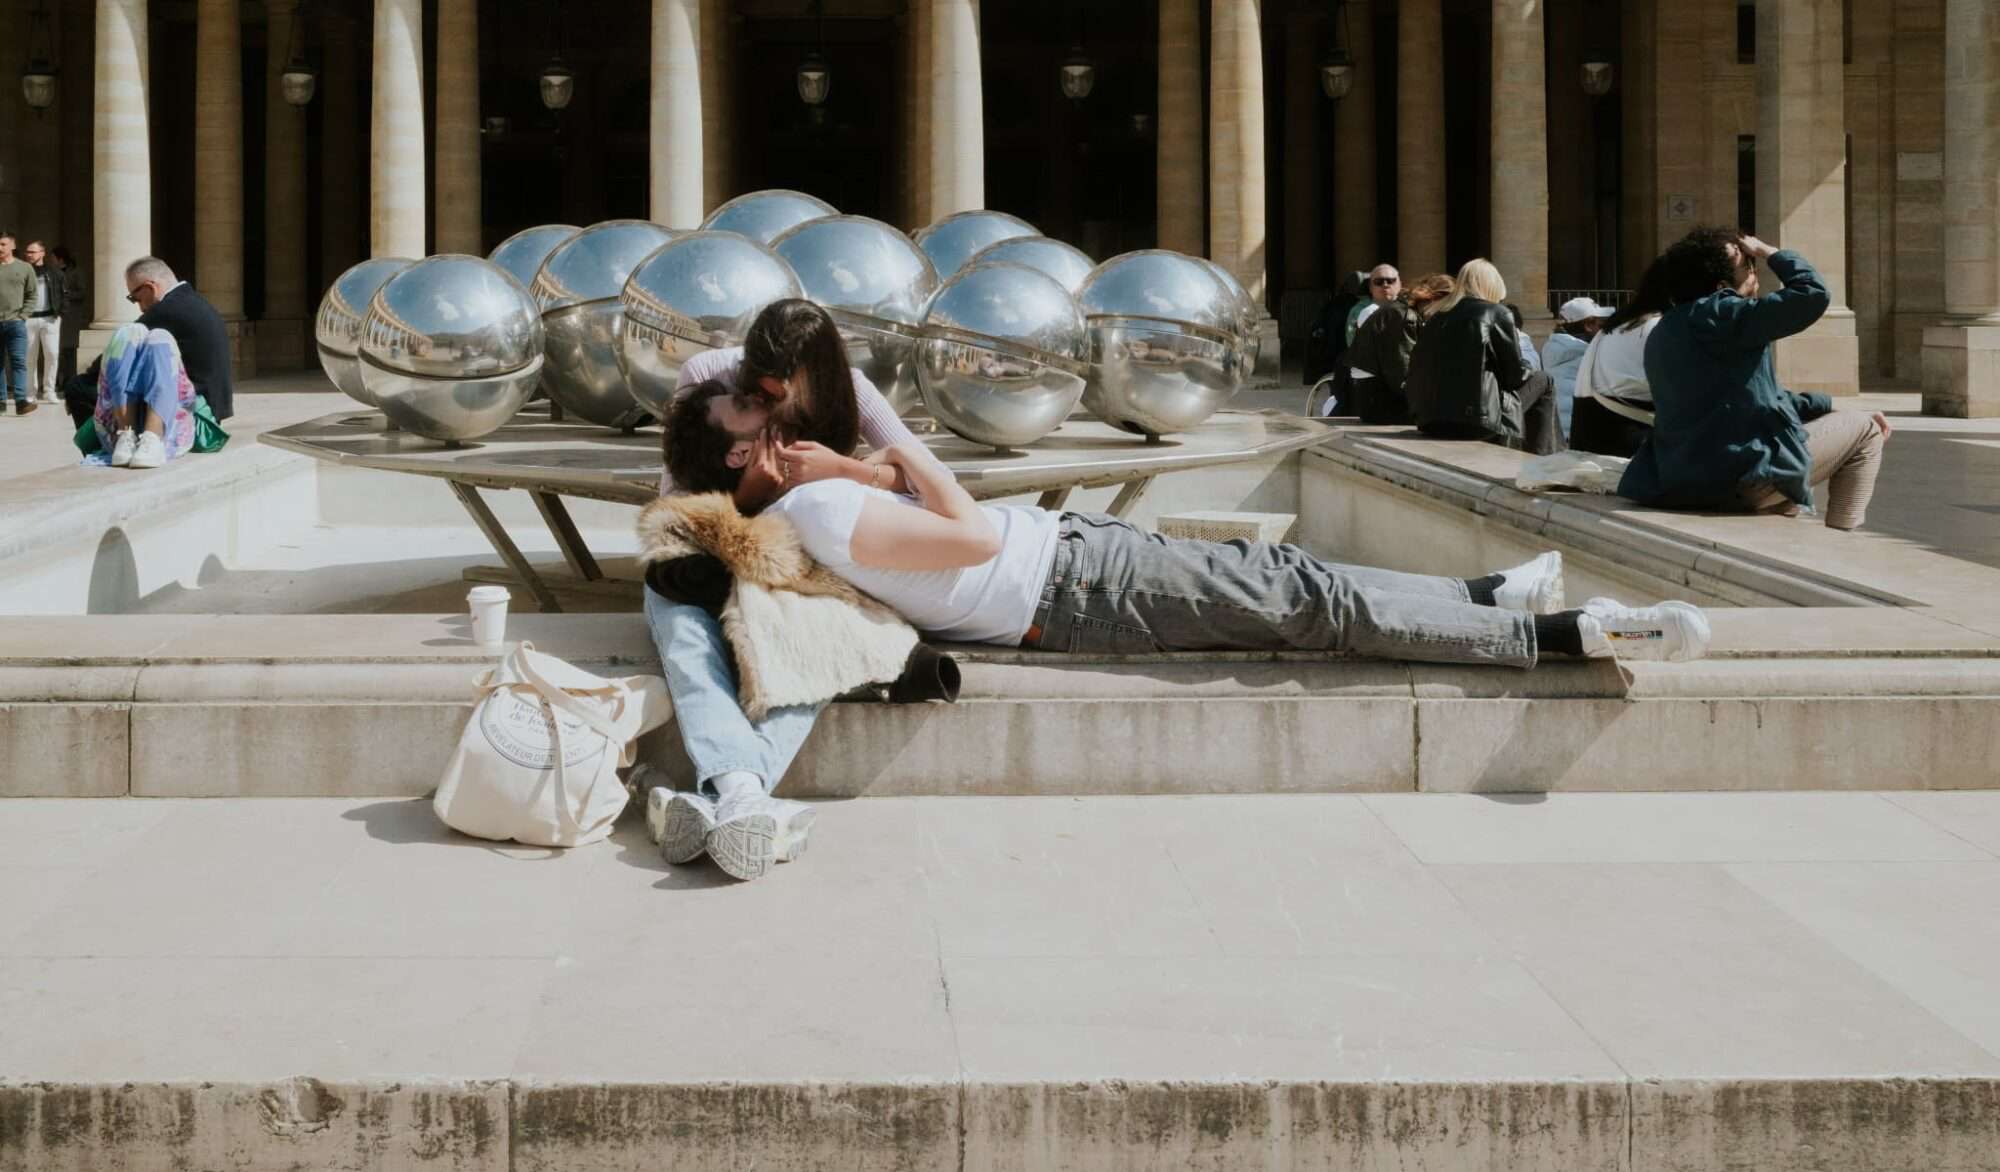 A French man has his head in the lap of a French girl and they are kissing in front of a sculpture in a square in Paris.